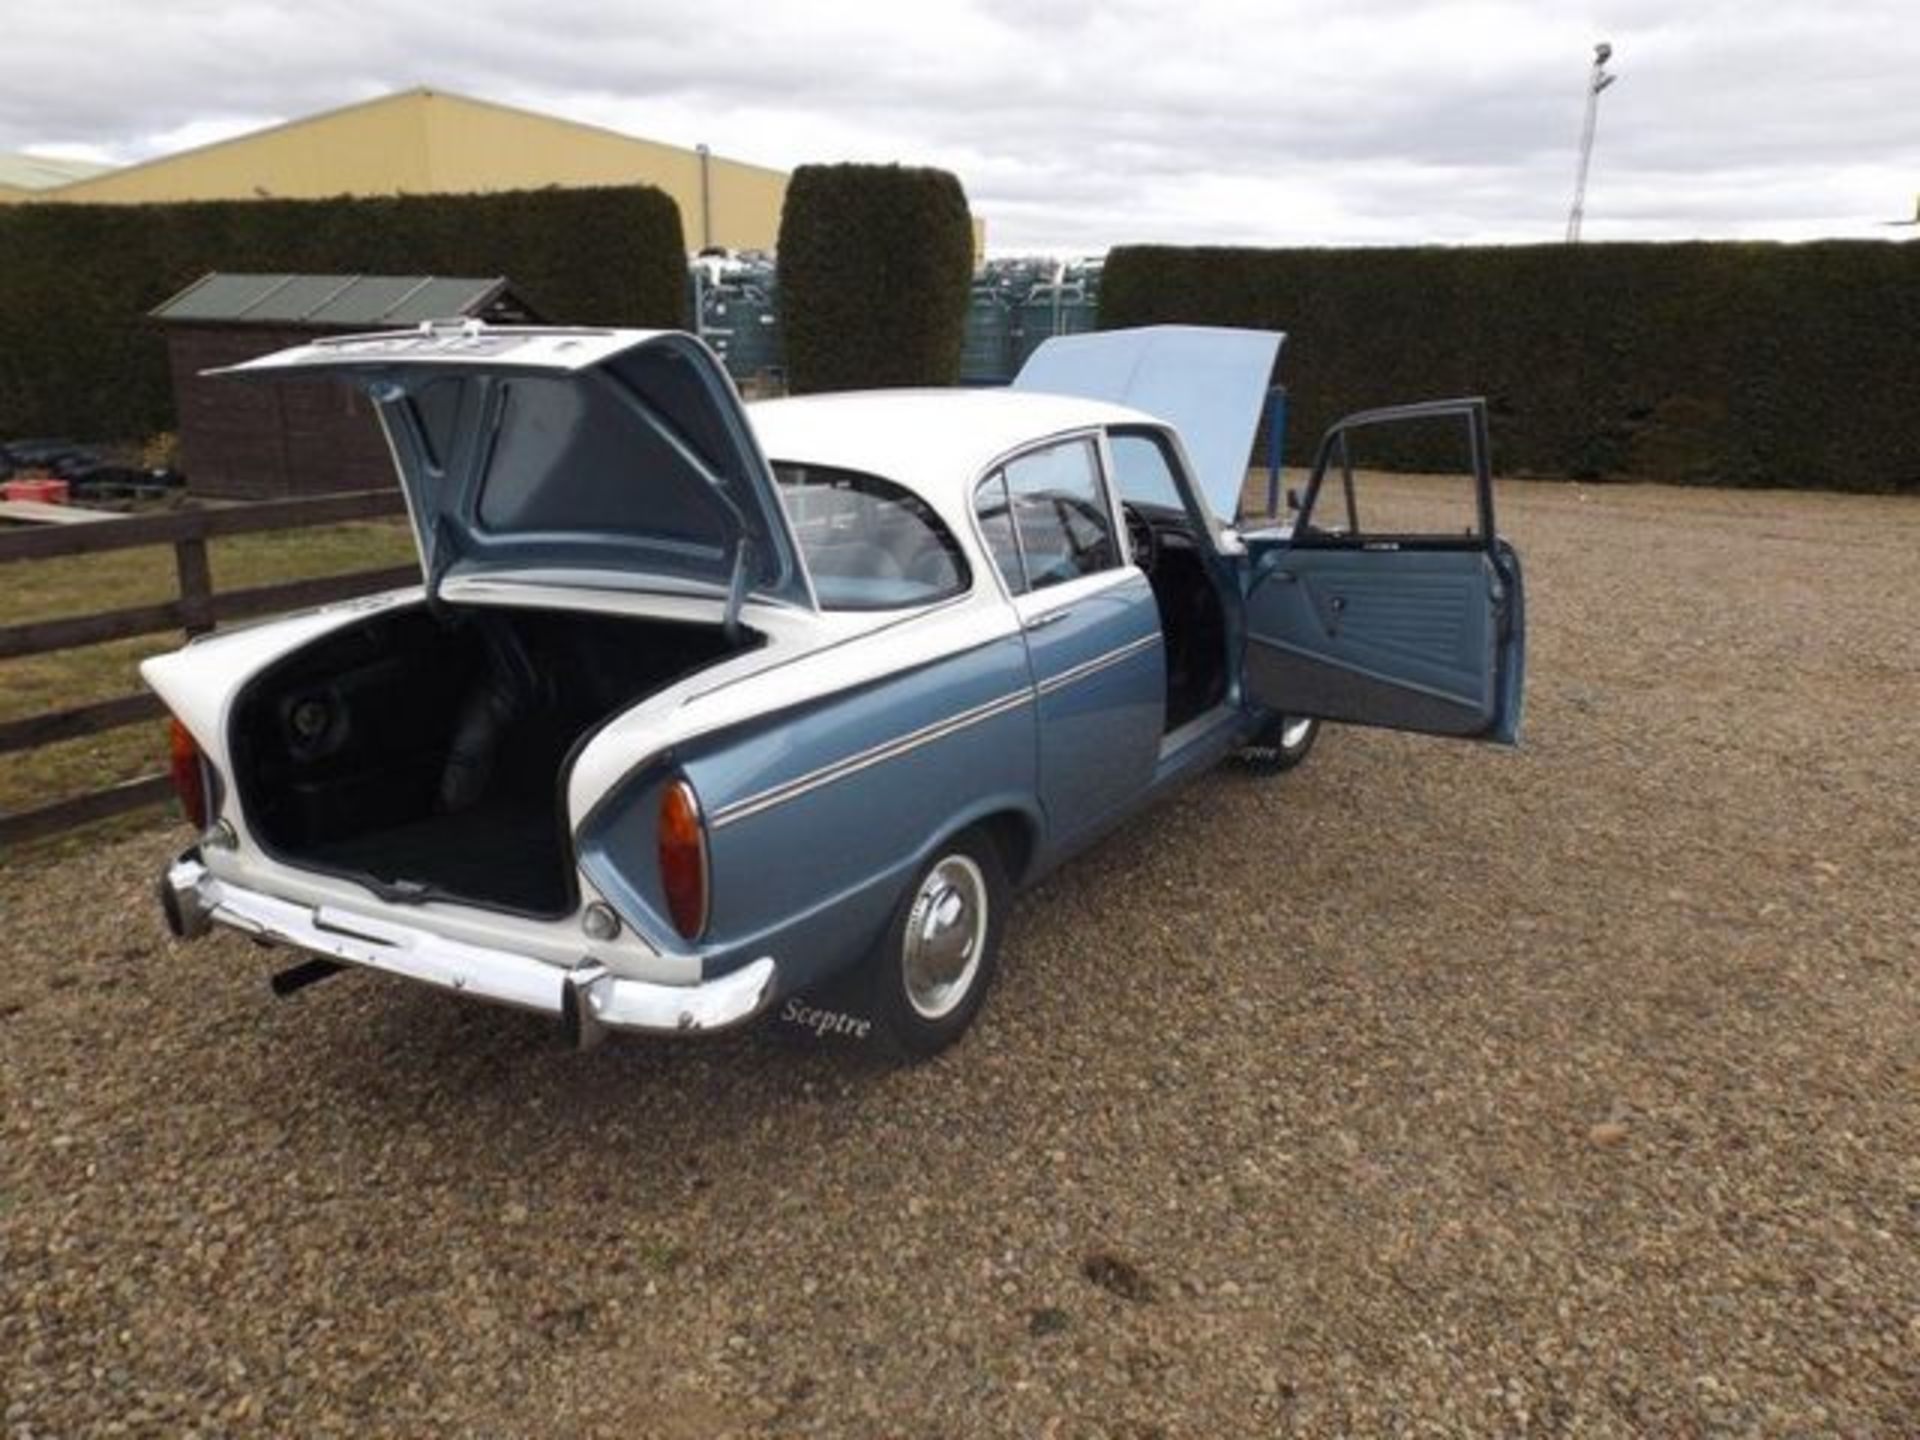 HUMBER, SCEPTRE MKII - 1725cc, Chassis number B1320056320DHS0 - this is a Mark II example which - Image 3 of 18